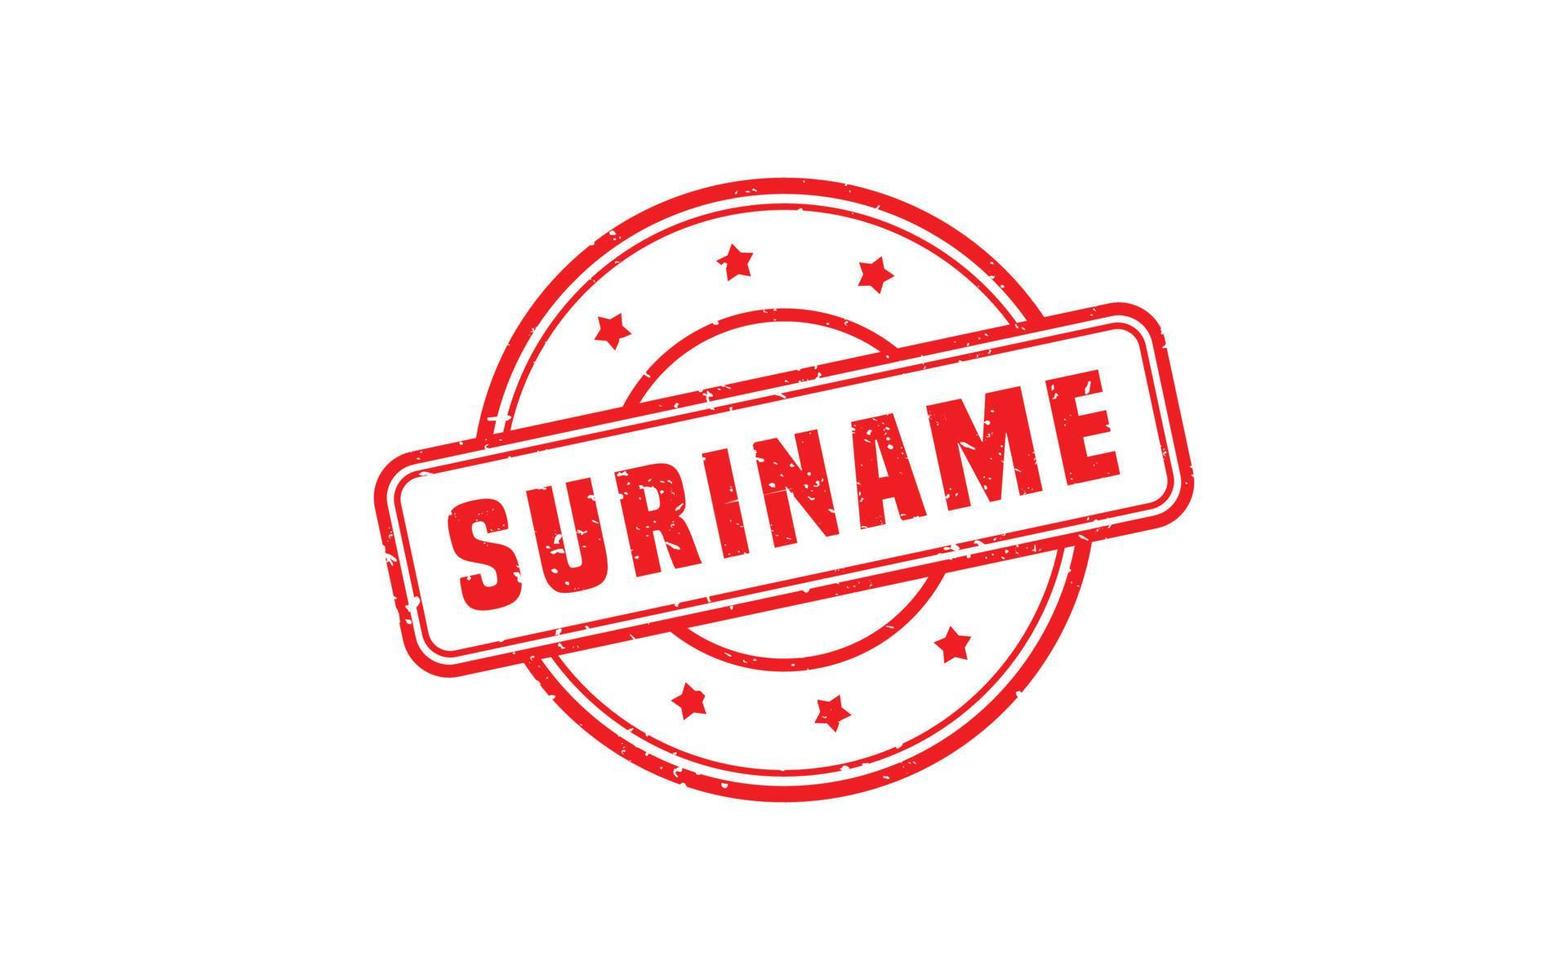 SURINAME stamp rubber with grunge style on white background vector